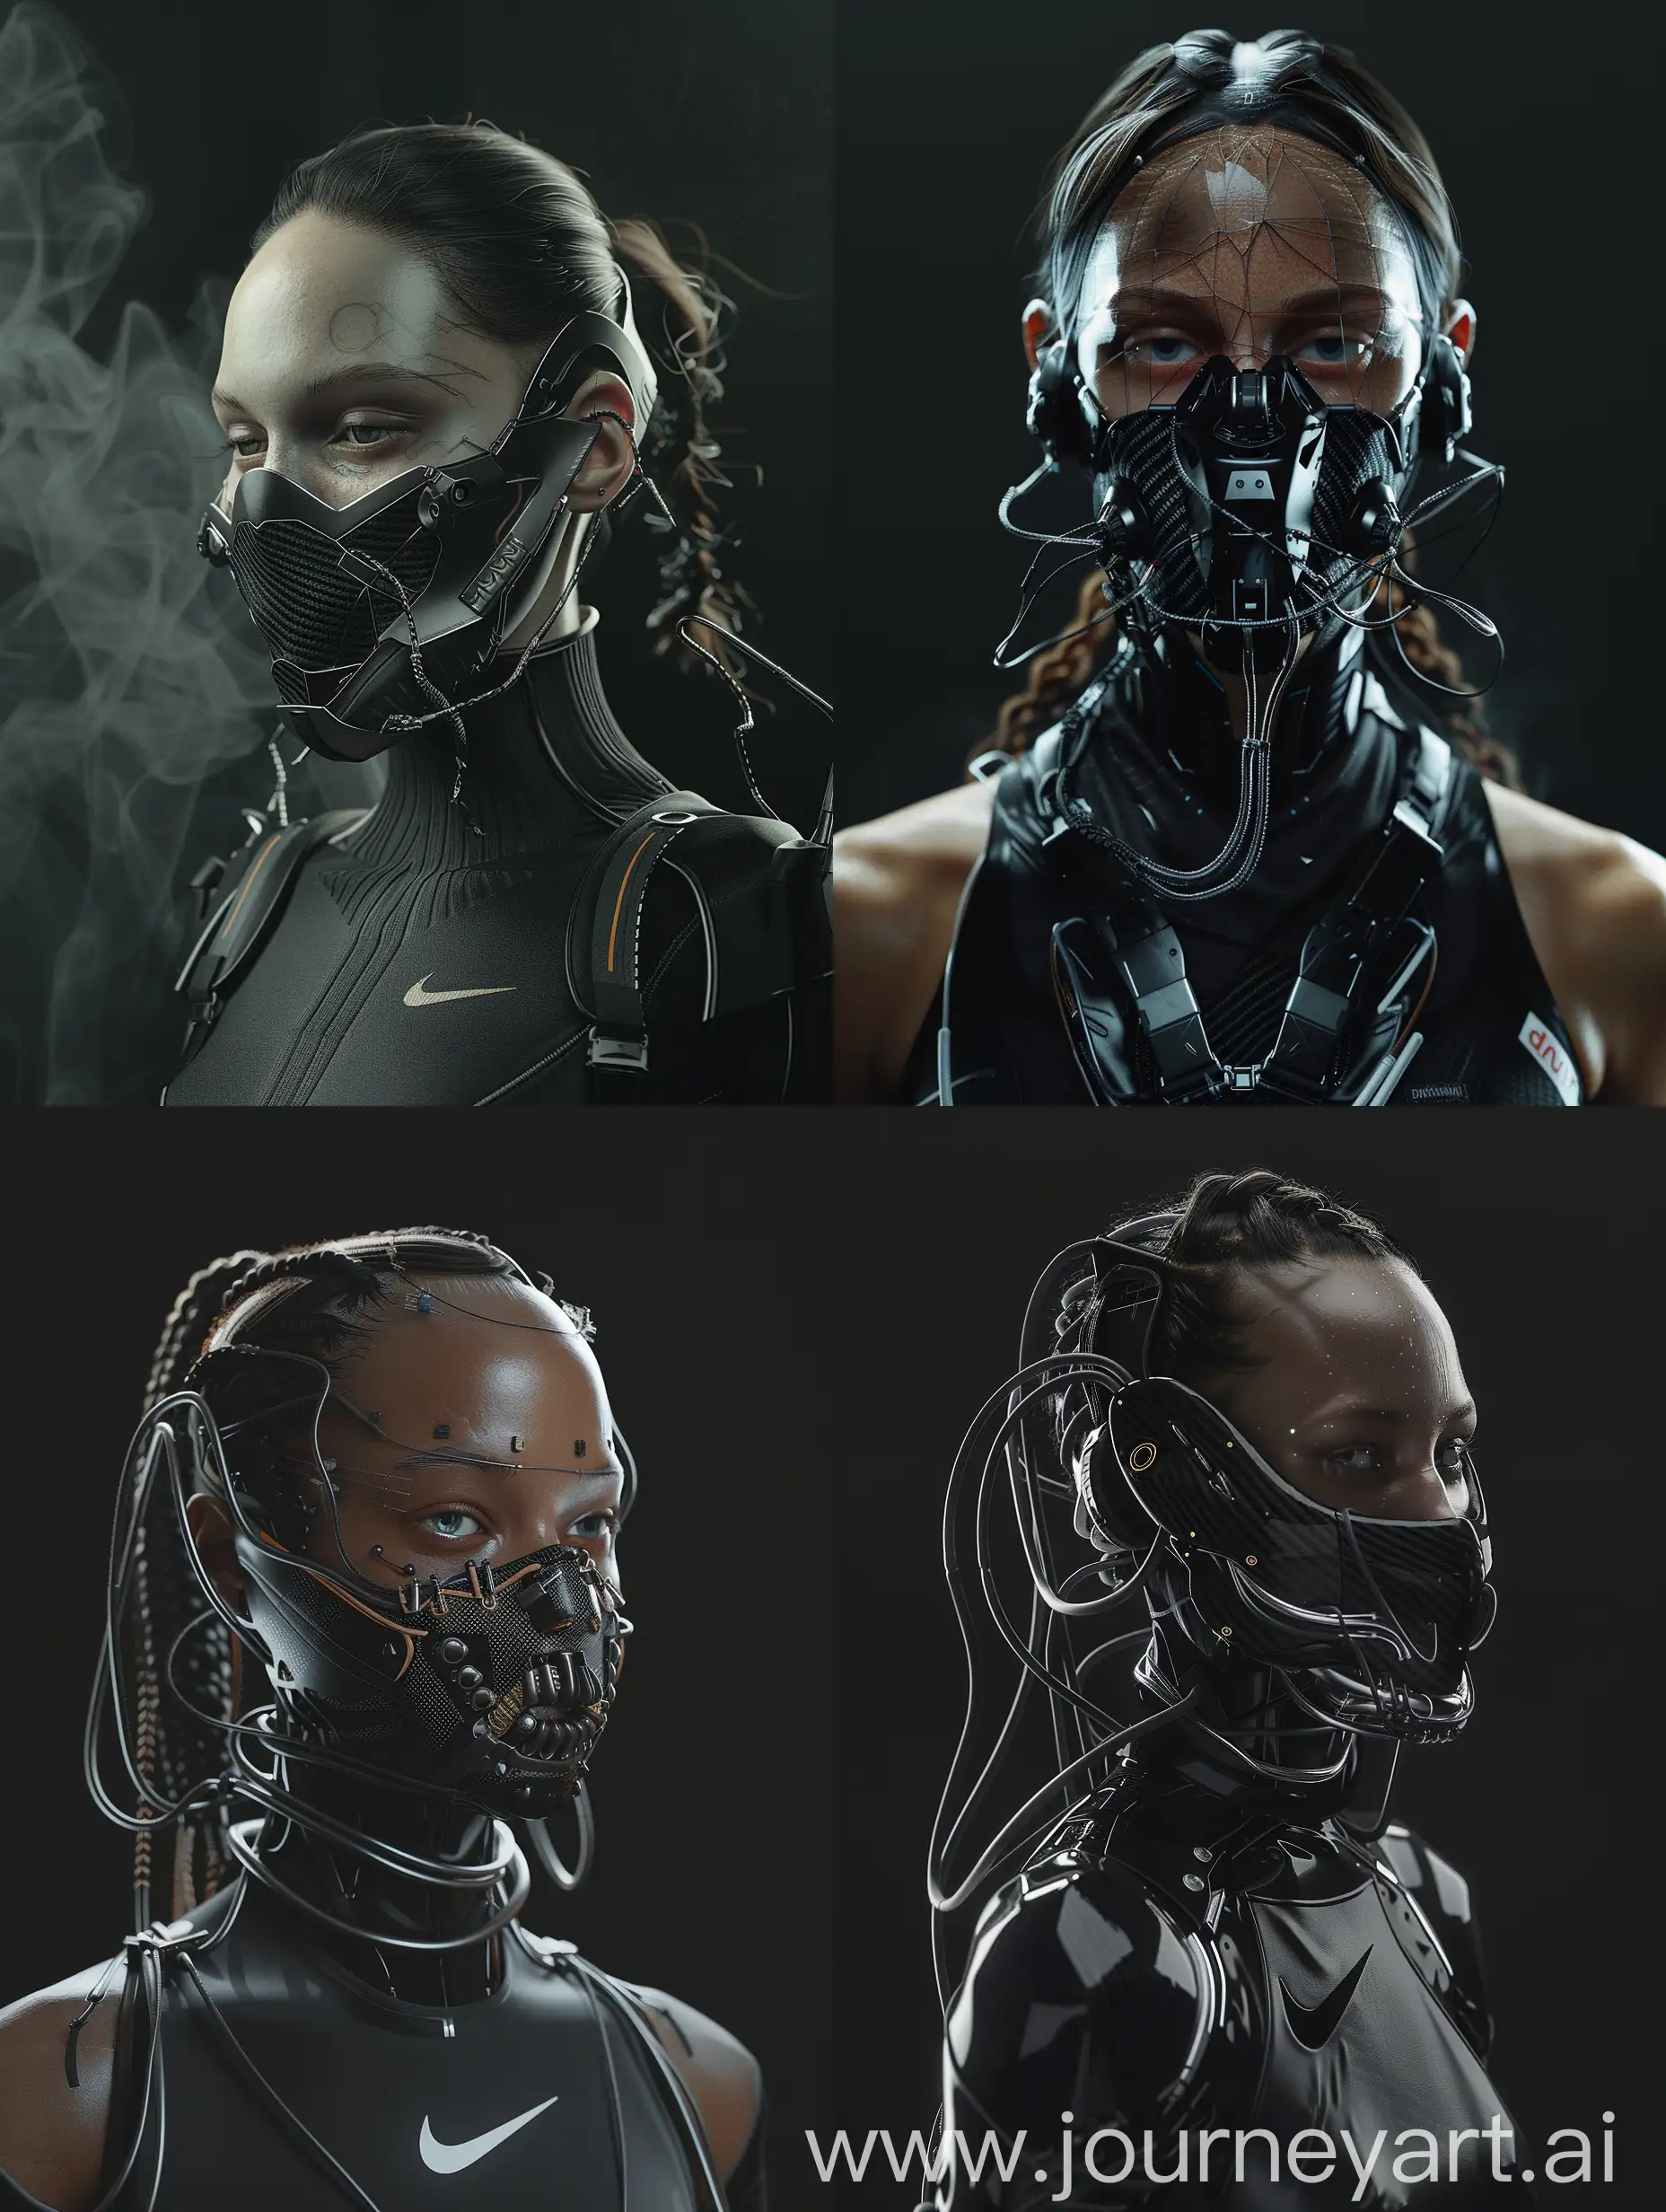 Against a sleek black backdrop, behold a mesmerizing character adorned with a cybernetic mouth-covering mask. It seamlessly blends cutting-edge technology with intricate details, boasting carbon fiber textures, sleek aluminum accents, and wires. Symbolizing the delicate balance between humanity and machine, her appearance embodies the essence of a futuristic cyberpunk aesthetic, enhanced with Nike-inspired add-ons. With dynamic movements reminiscent of action film sequences and cinematic haze, her presence captivates with its irresistible allure.v1

